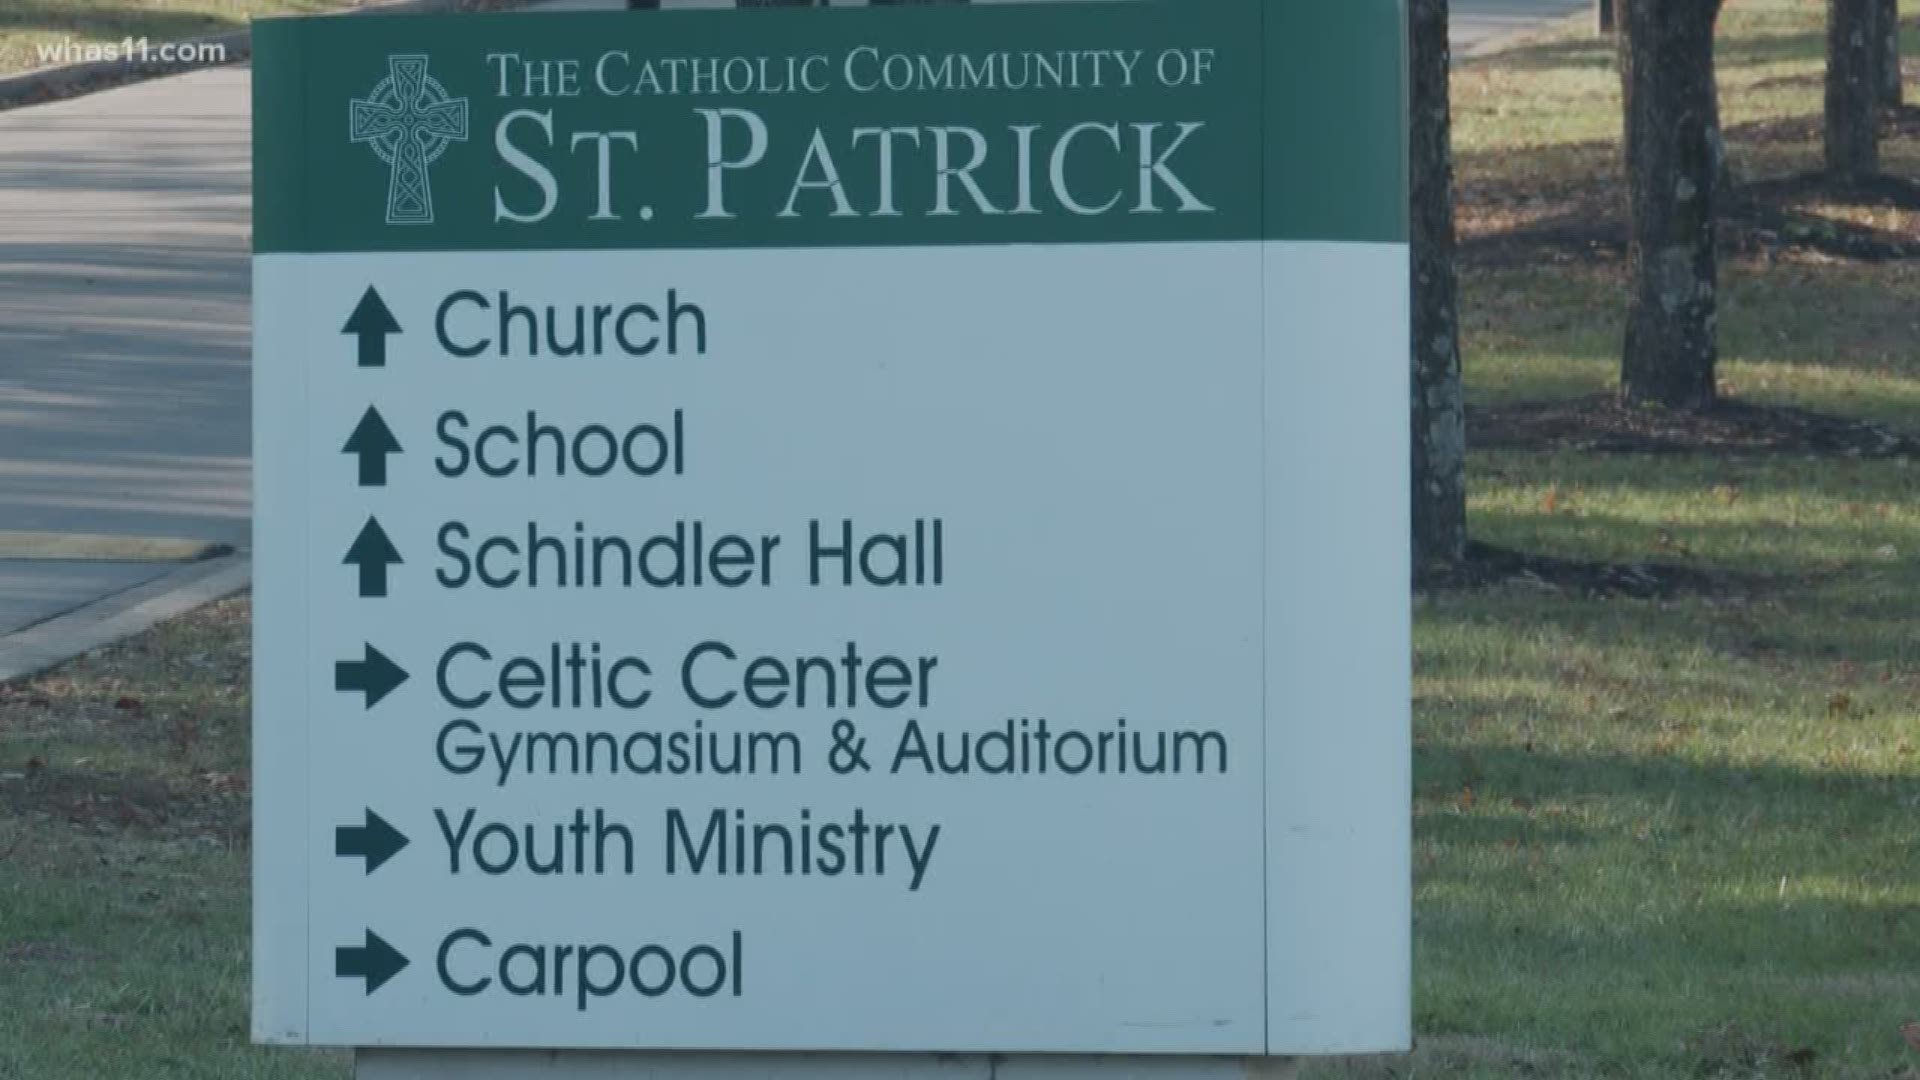 St. Patrick Catholic School believes the suspect tried to break into its church and is the same man connected to a suspicious social media account.